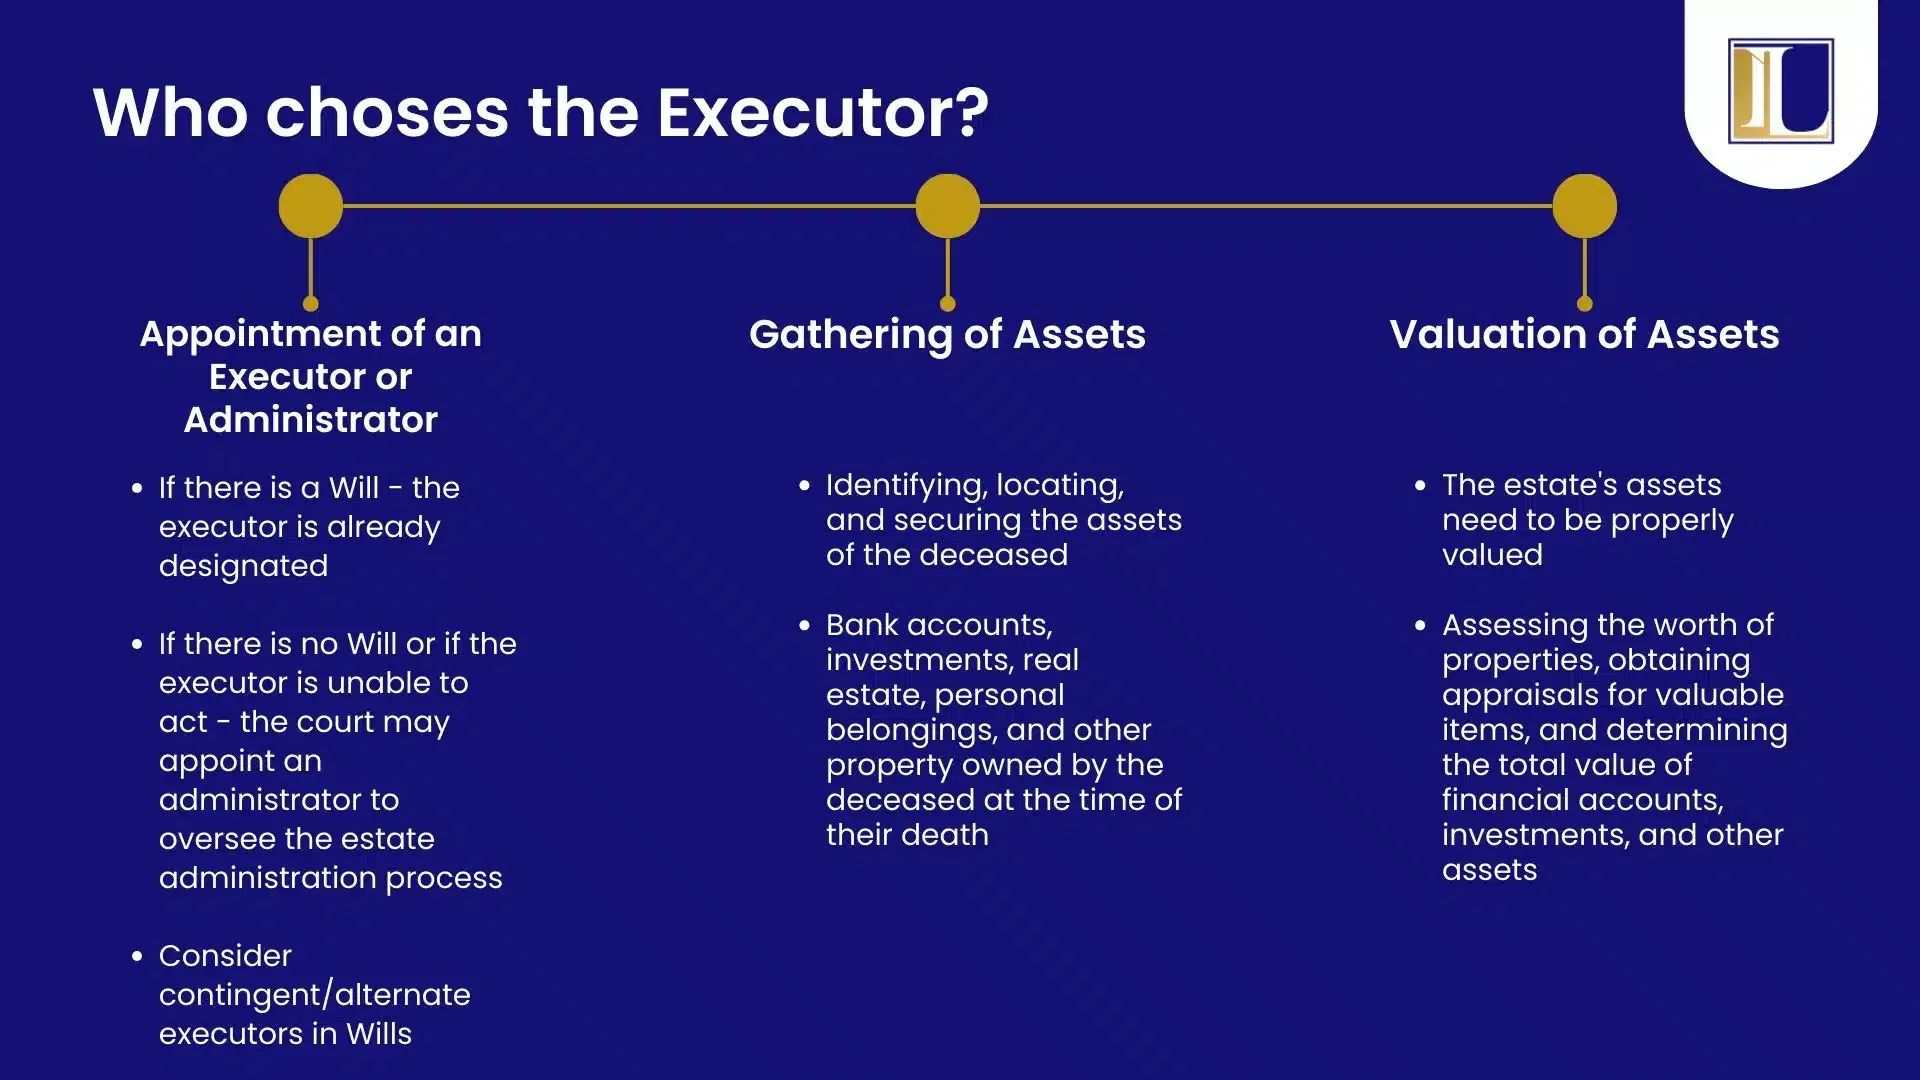 Who is the Executor